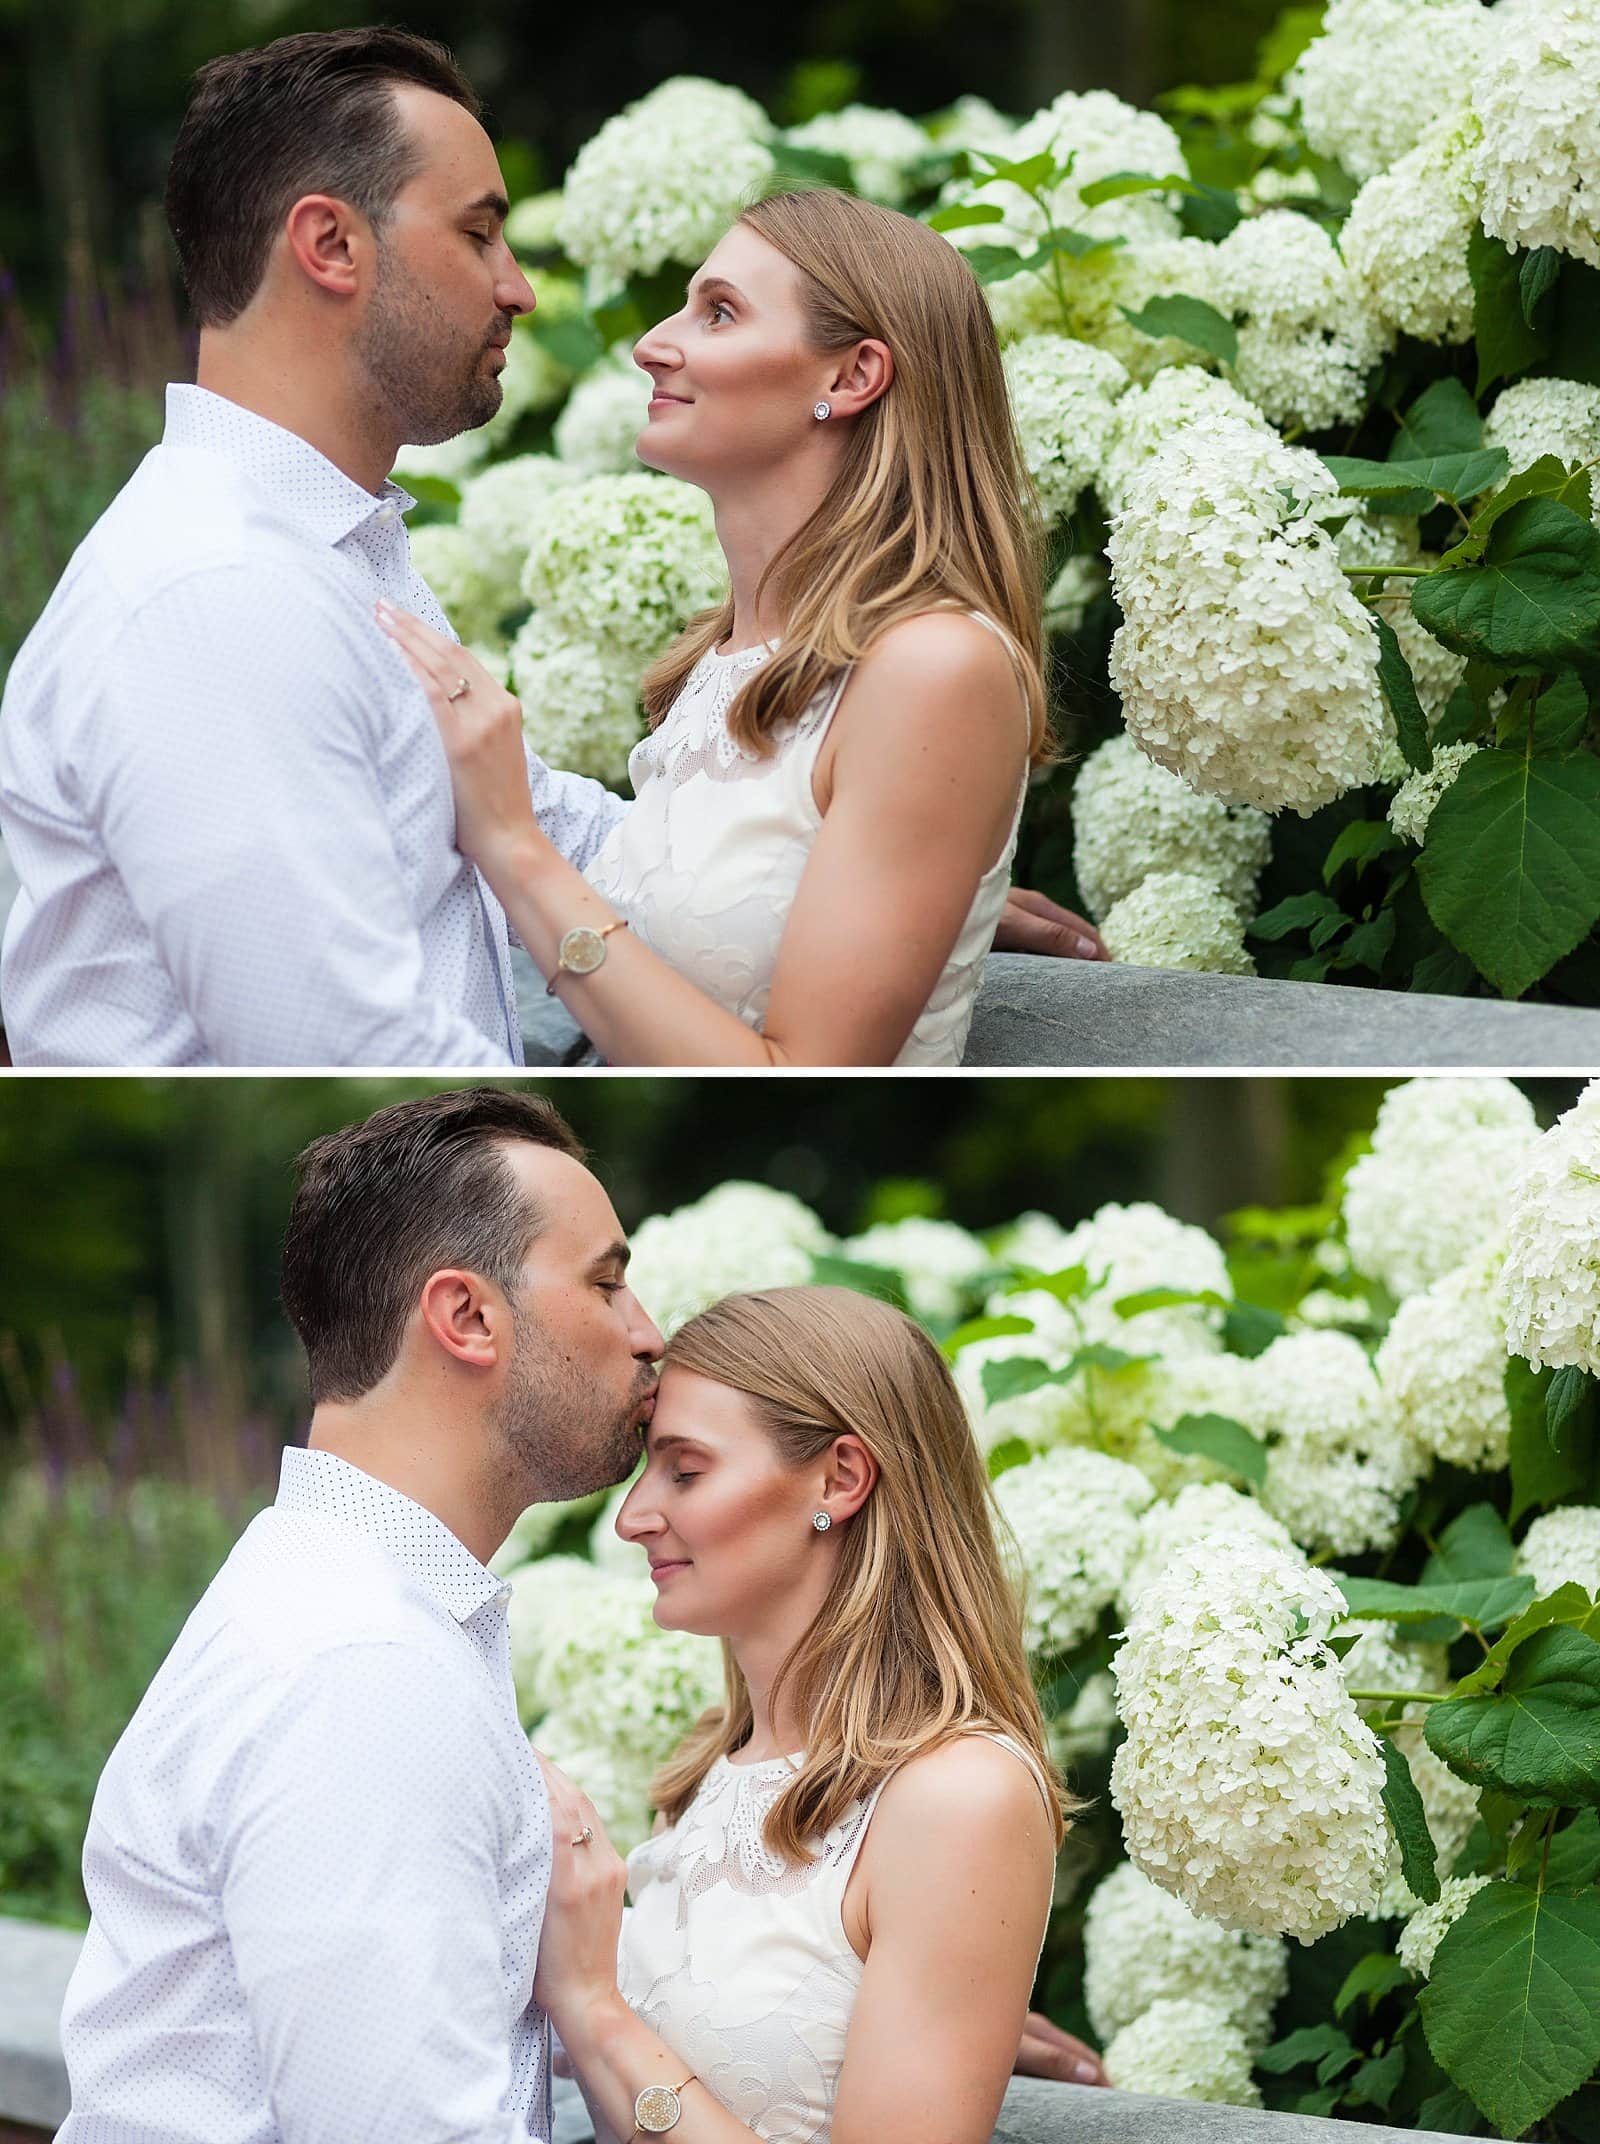 Intimate engagement portraits, couple embracing, kissing on forehead, flowers